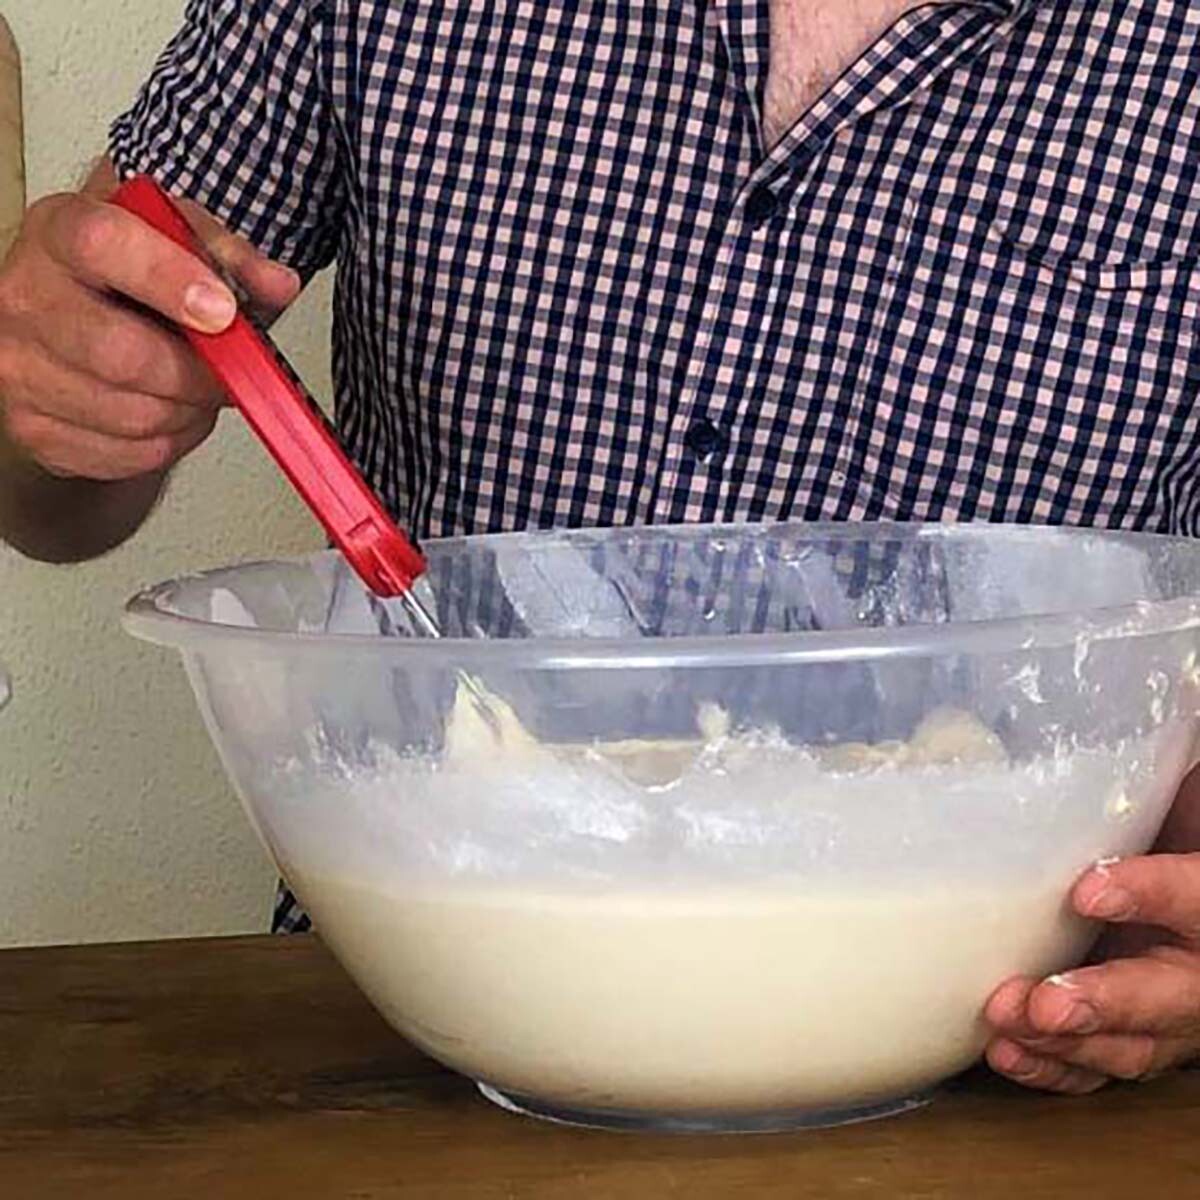 https://www.busbysbakery.com/wp-content/uploads/2020/11/dough-thermometer-scaled-1.jpg